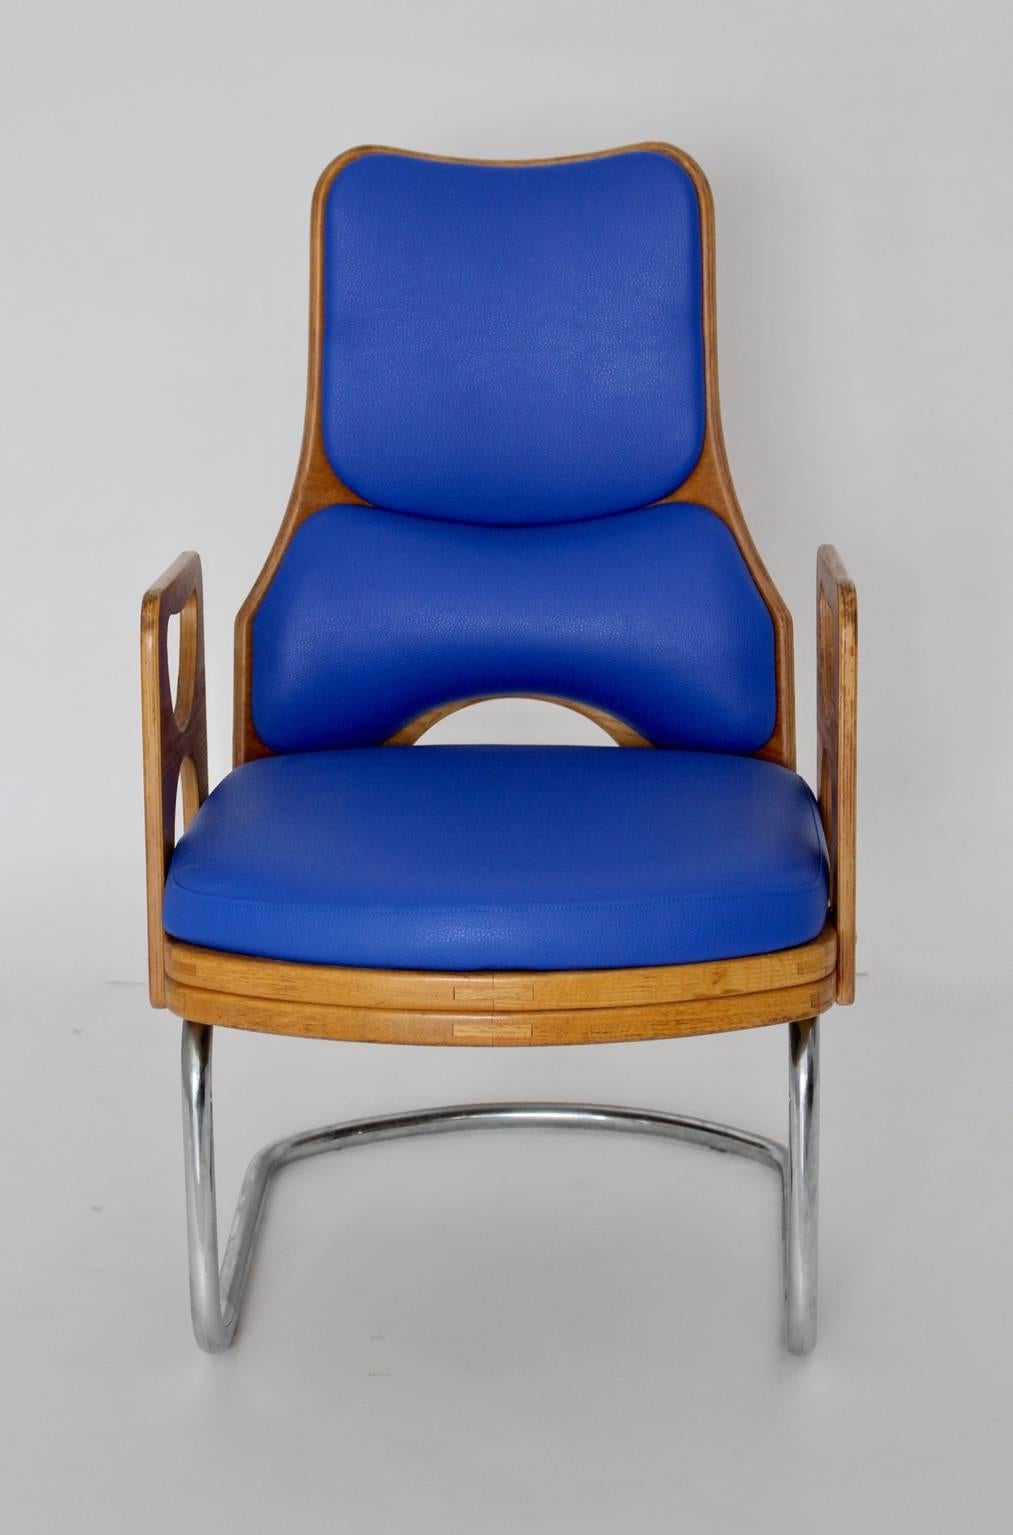 20th Century Space Age Blue Vintage Teak Armchair or Lounge Chair 1960s For Sale